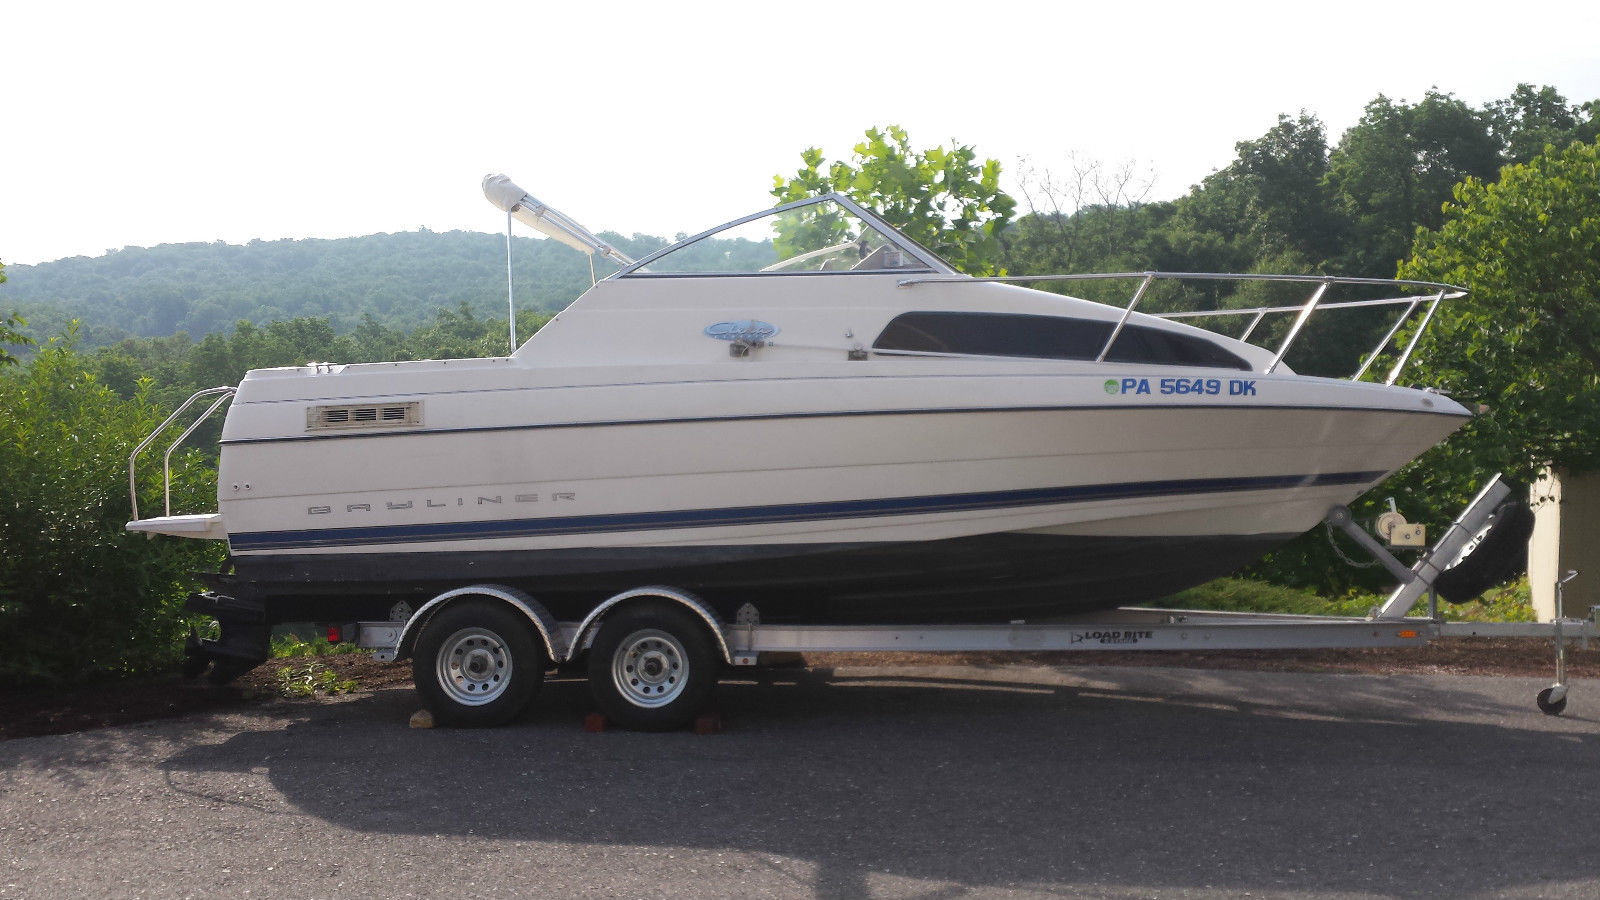 Bayliner 2252 Classic 2003 for sale for $11,900 - Boats ...